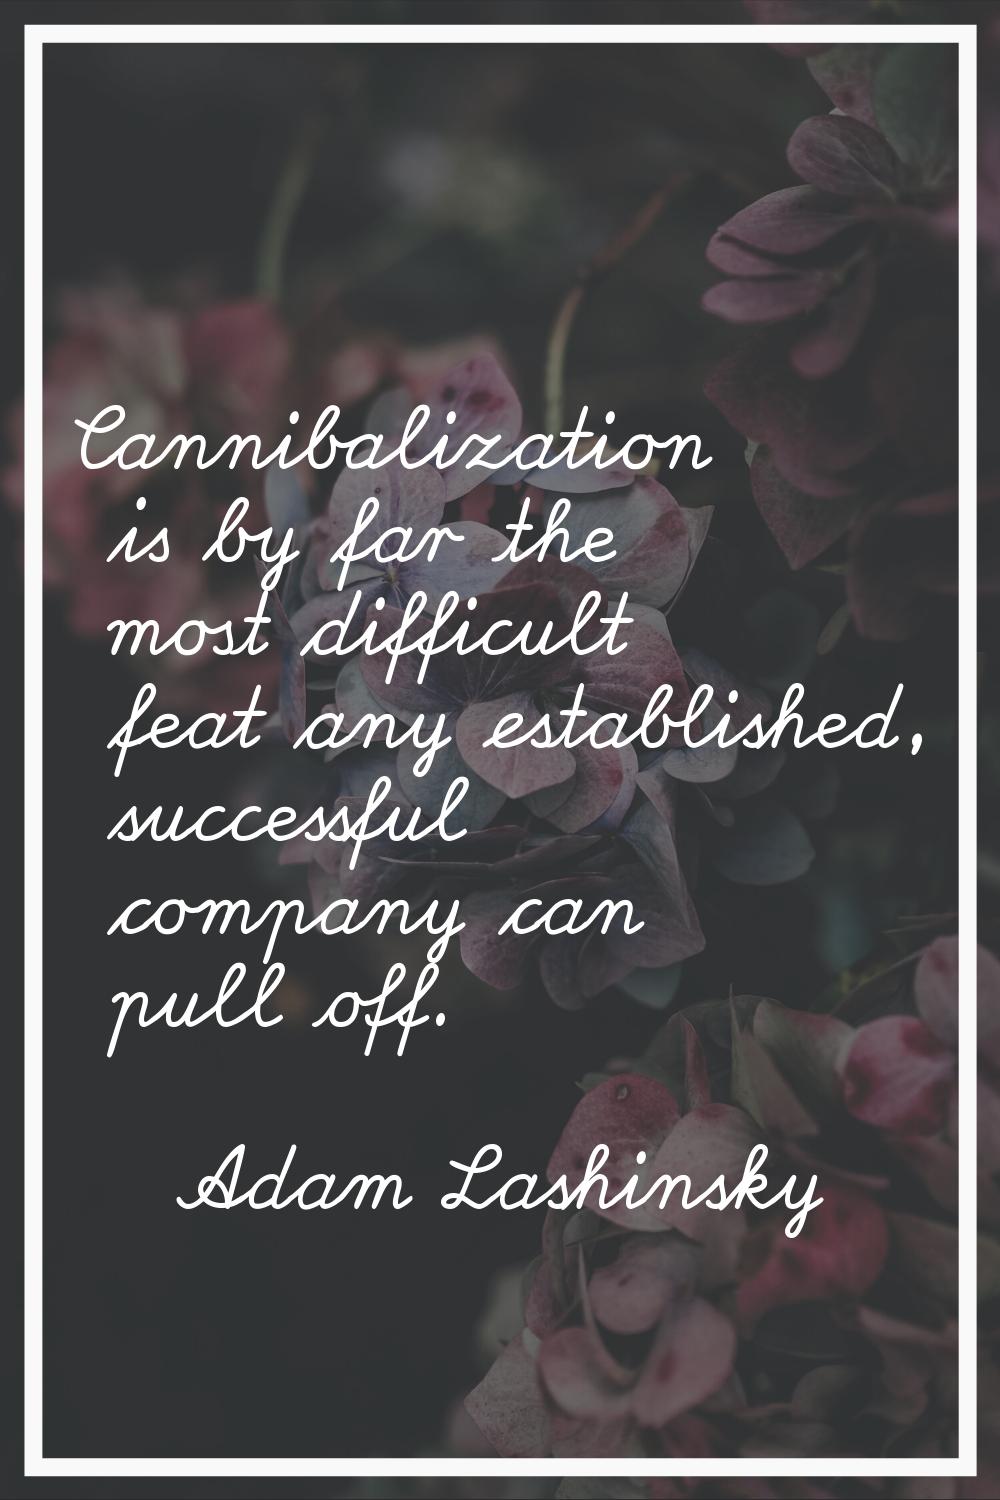 Cannibalization is by far the most difficult feat any established, successful company can pull off.